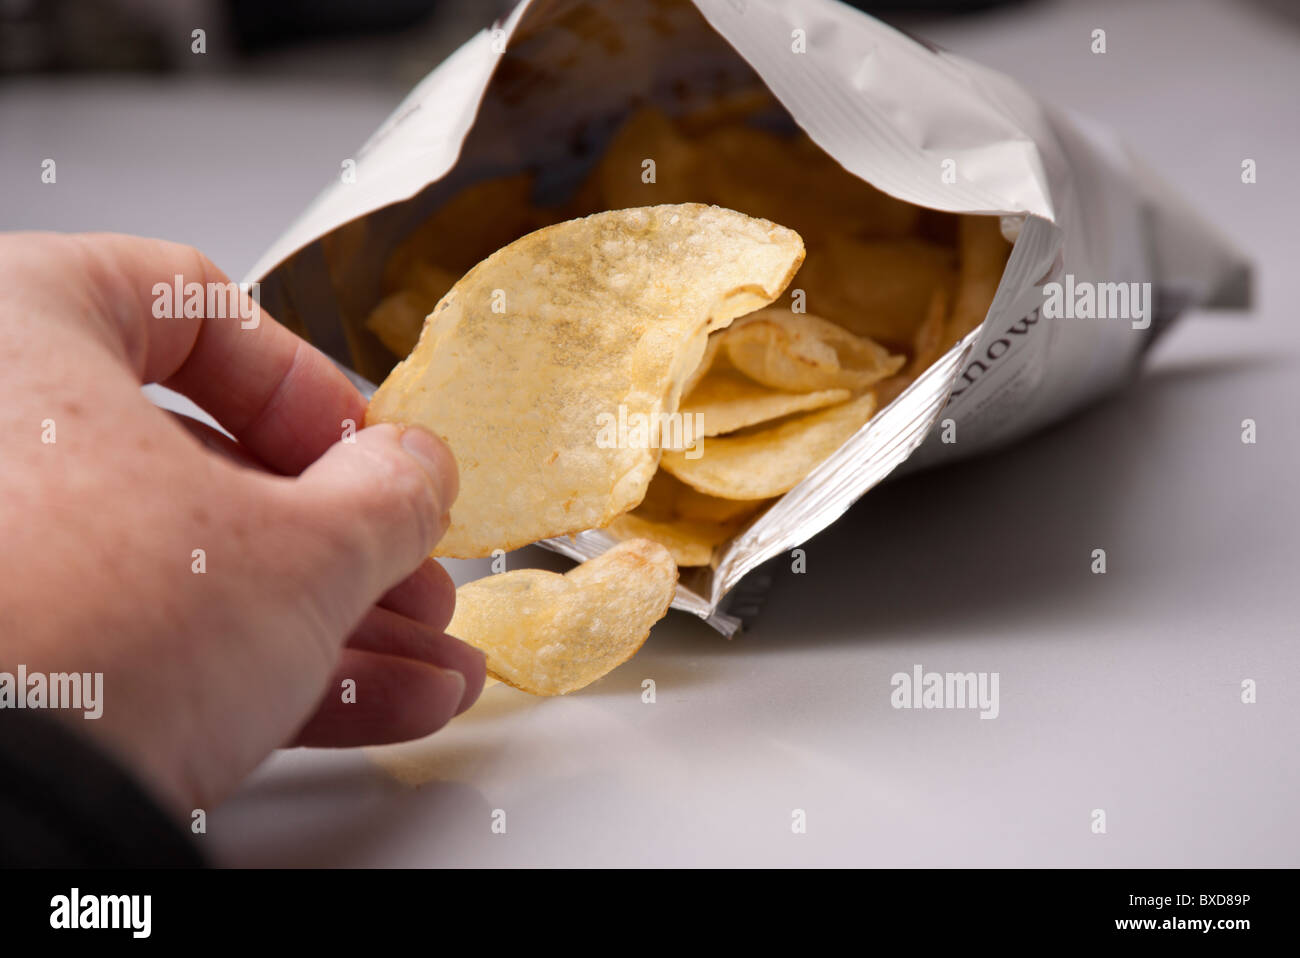 man taking a crisp out of a bag of crisps Stock Photo